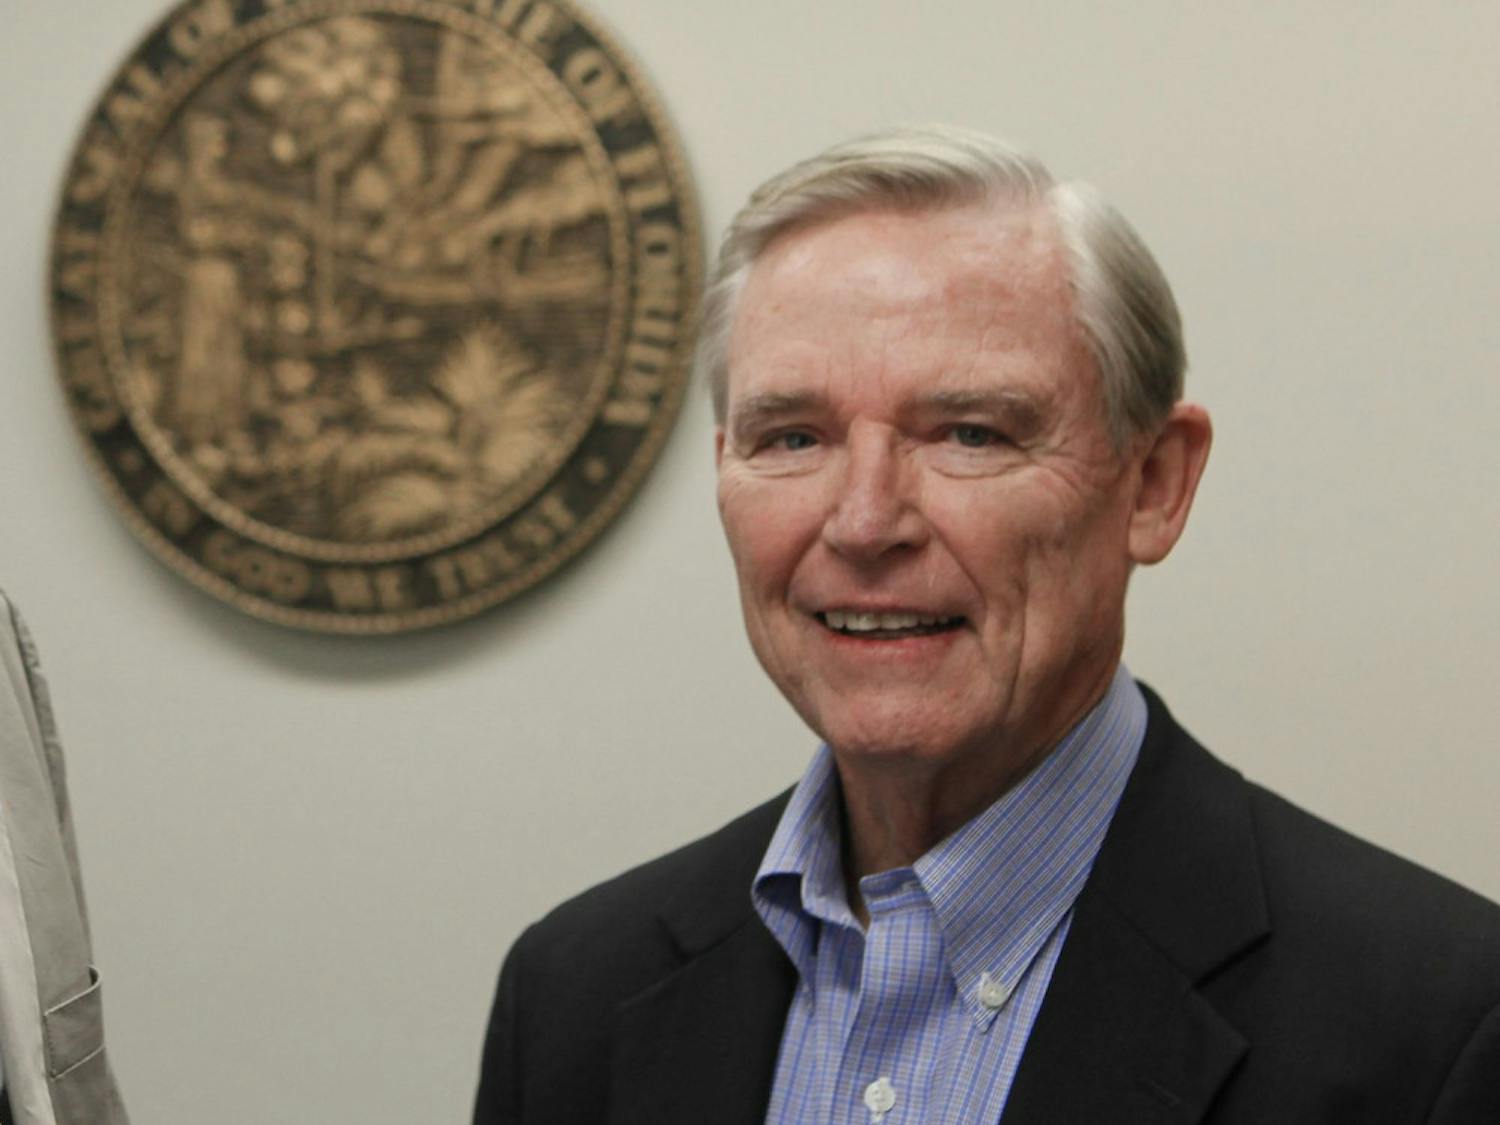 



David Colburn, died on Sep. 18, 2019. Colburn served as the director&nbsp;served as the chair for the Department of History, vice provost and dean of the International Center, and UF’s provost and senior vice president in his nearly 50-year career.



